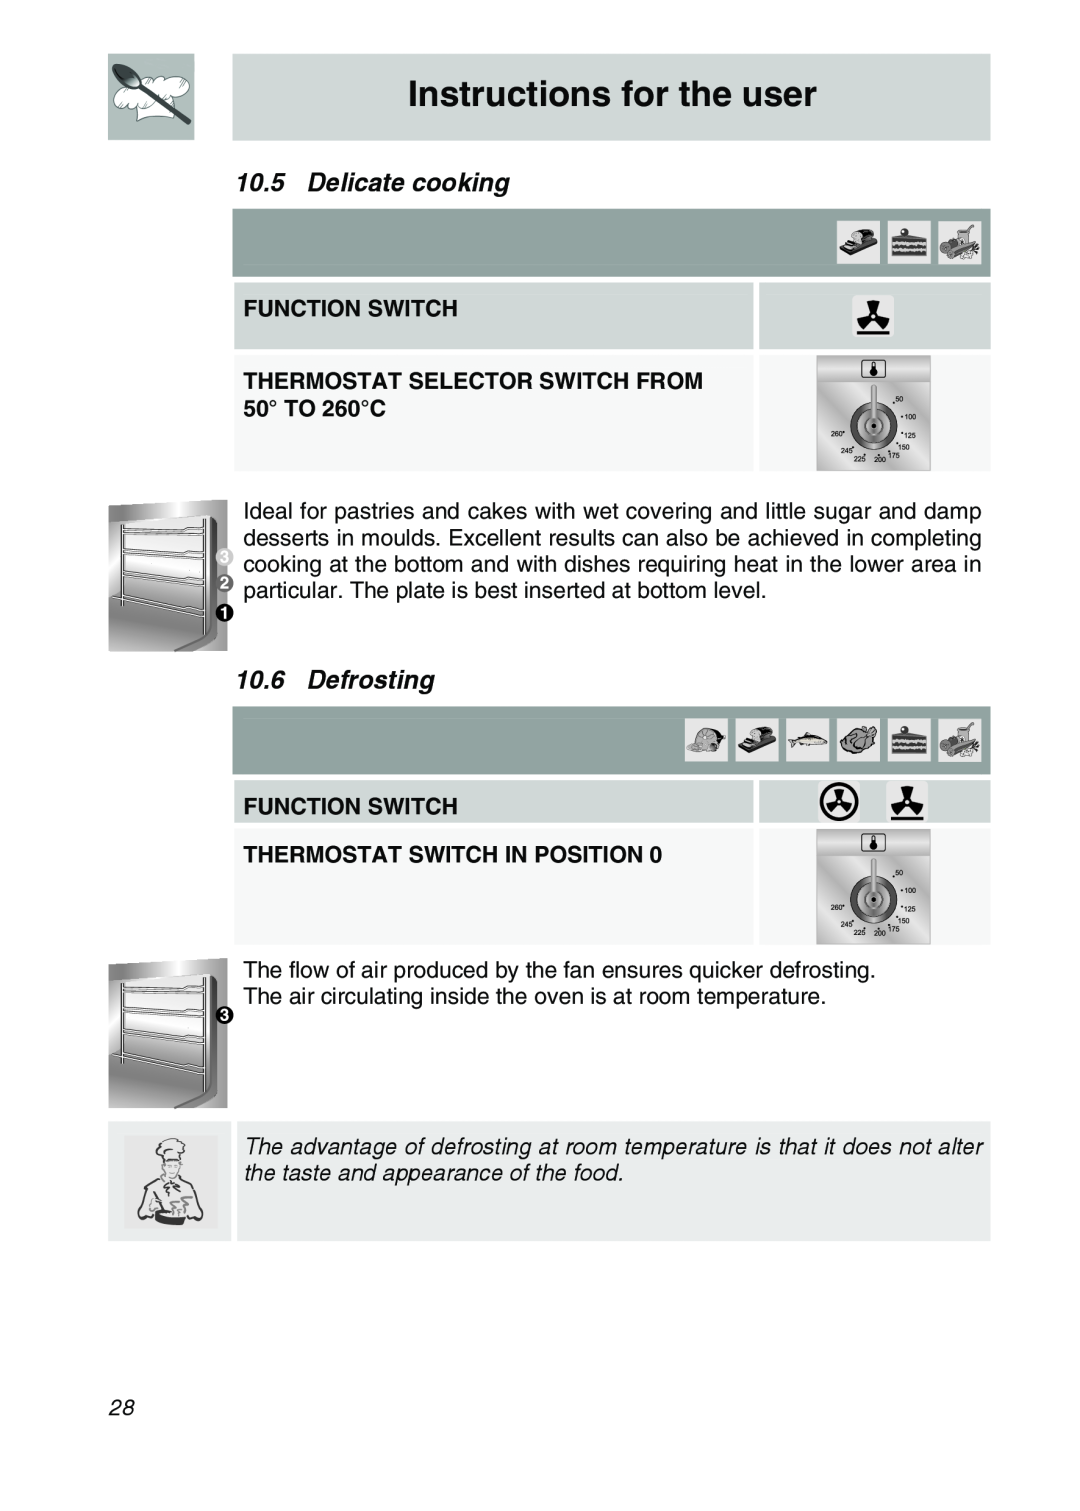 Smeg SA9065XNG Delicate cooking, Defrosting, Instructions for the user, Function Switch Thermostat Switch In Position 